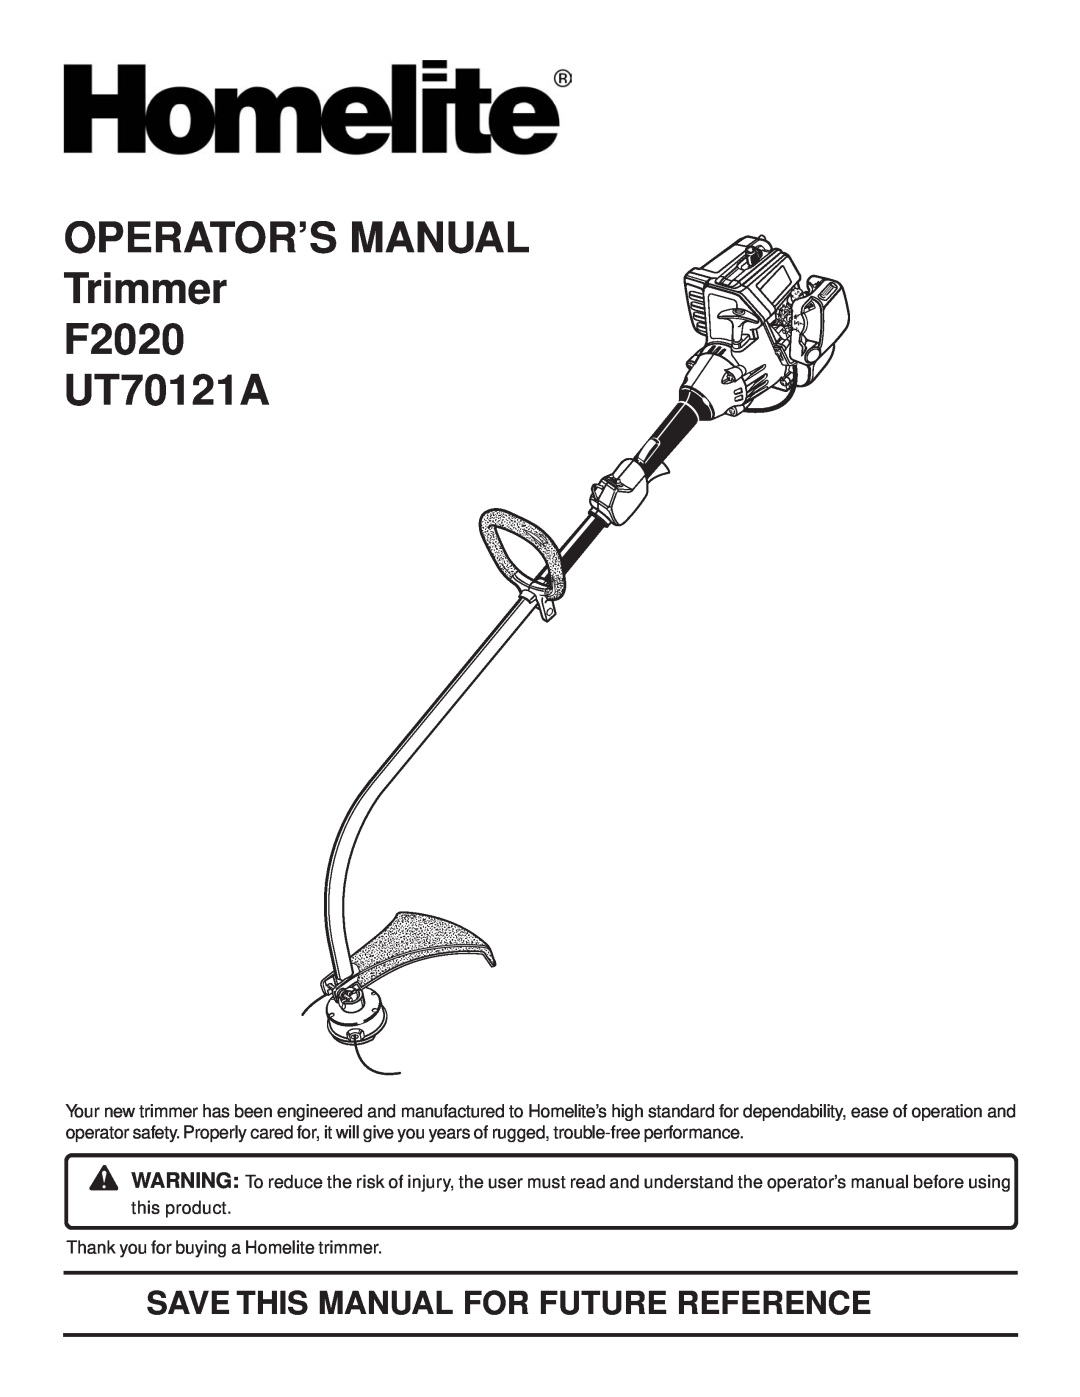 Homelite manual OPERATOR’S MANUAL Trimmer F2020 UT70121A, Save This Manual For Future Reference 